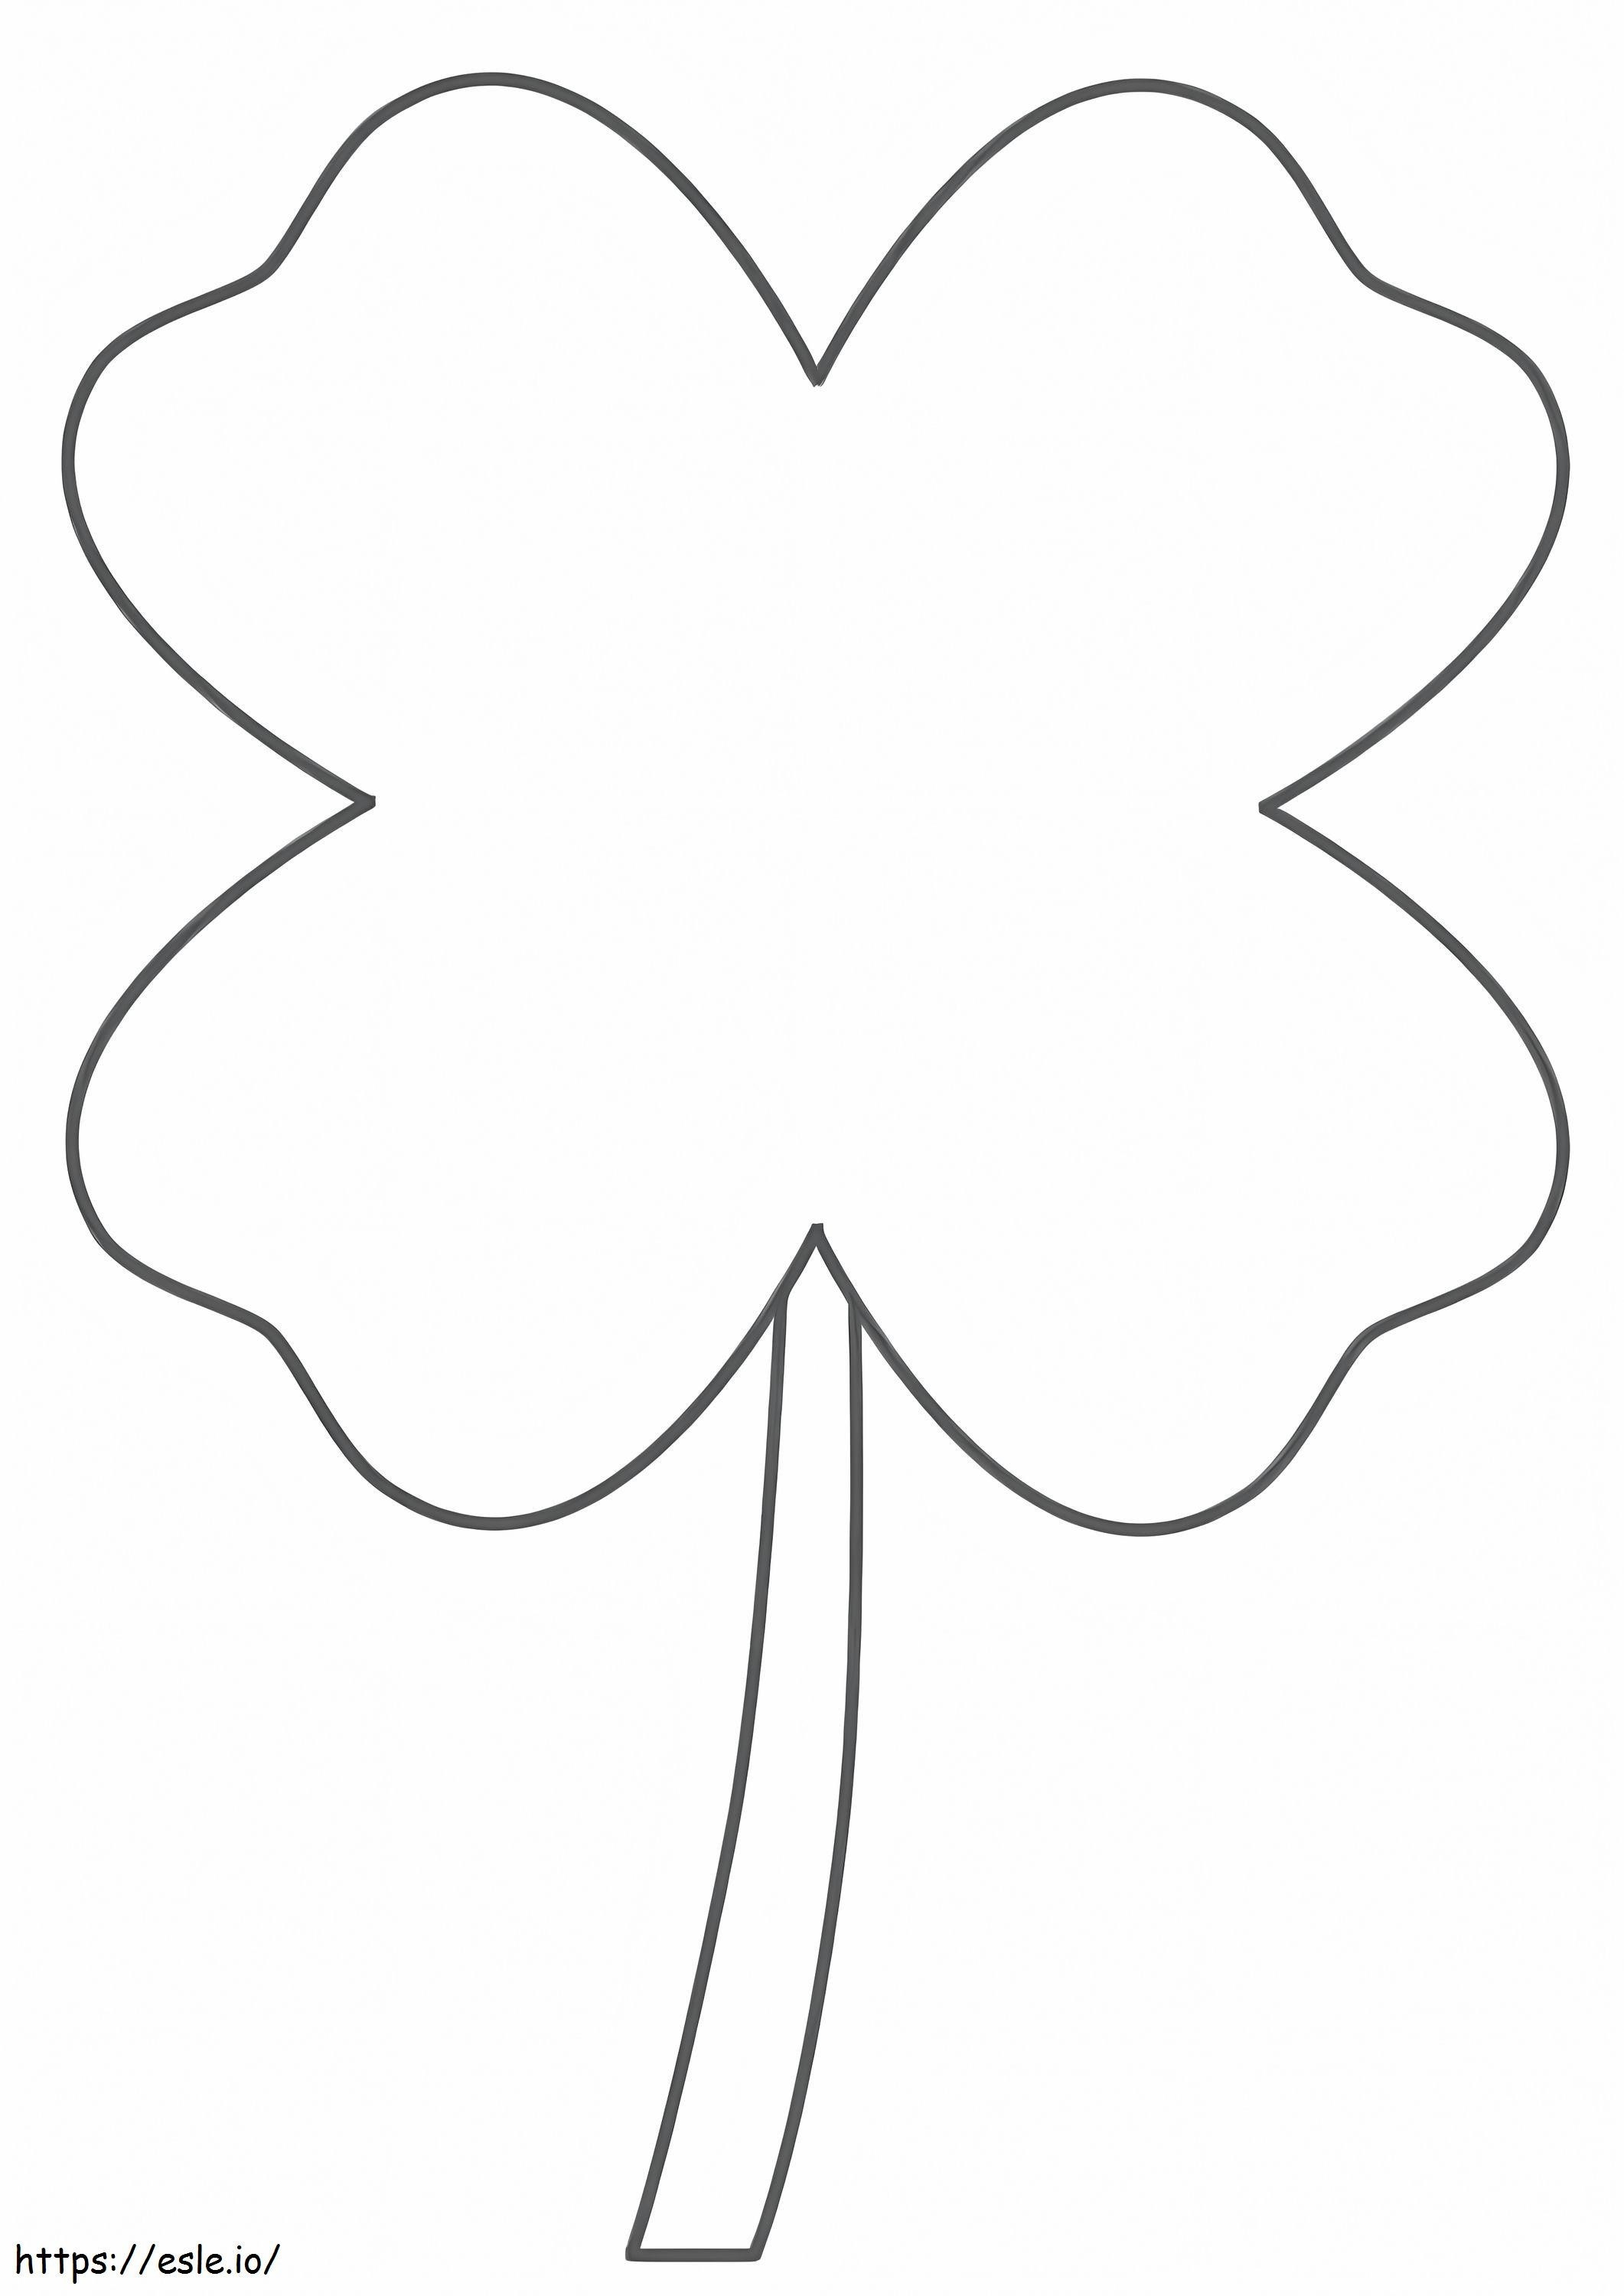 Normal Four Leaf Clover coloring page